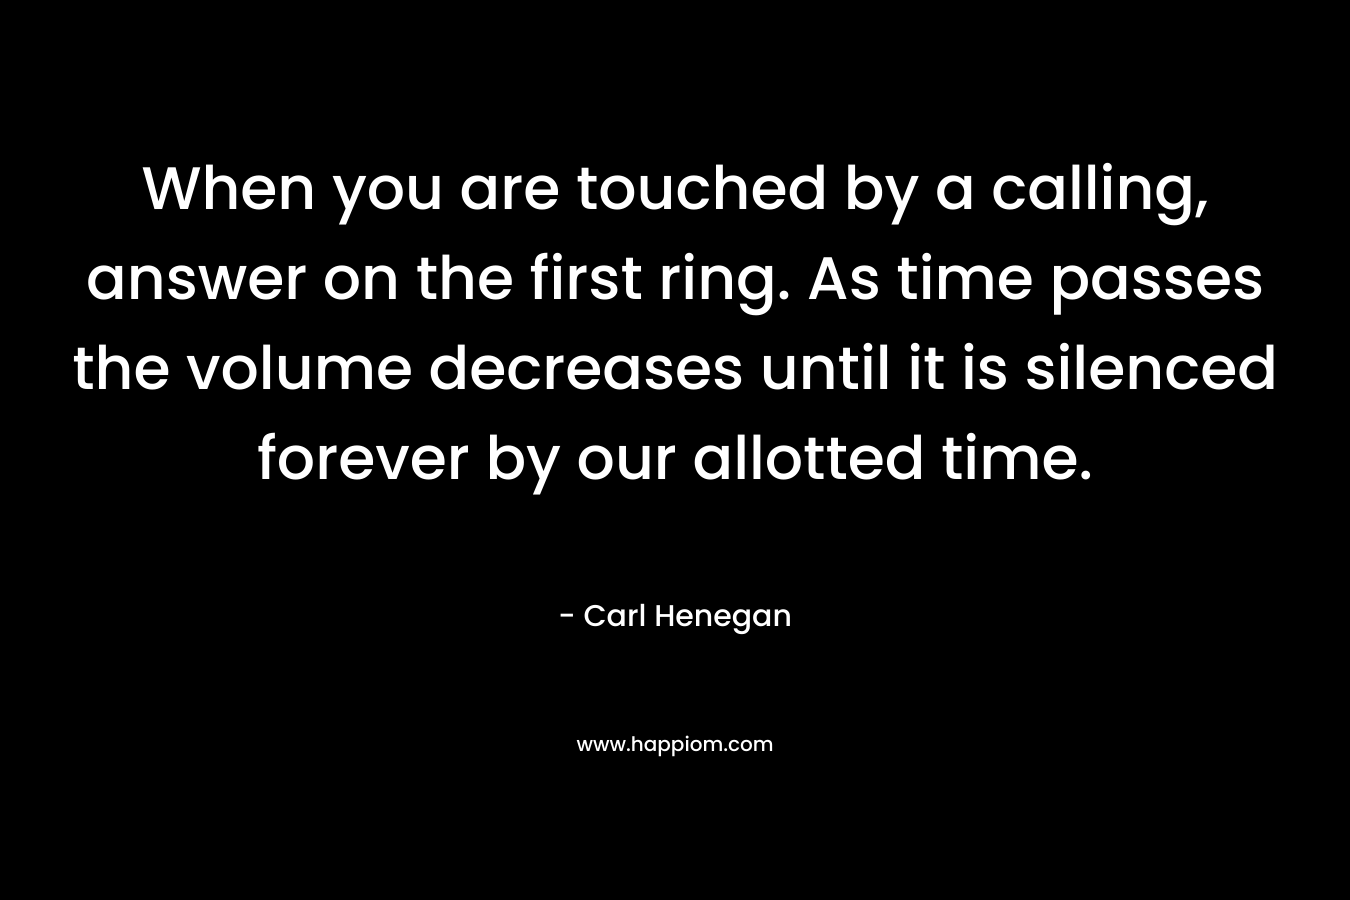 When you are touched by a calling, answer on the first ring. As time passes the volume decreases until it is silenced forever by our allotted time. – Carl Henegan